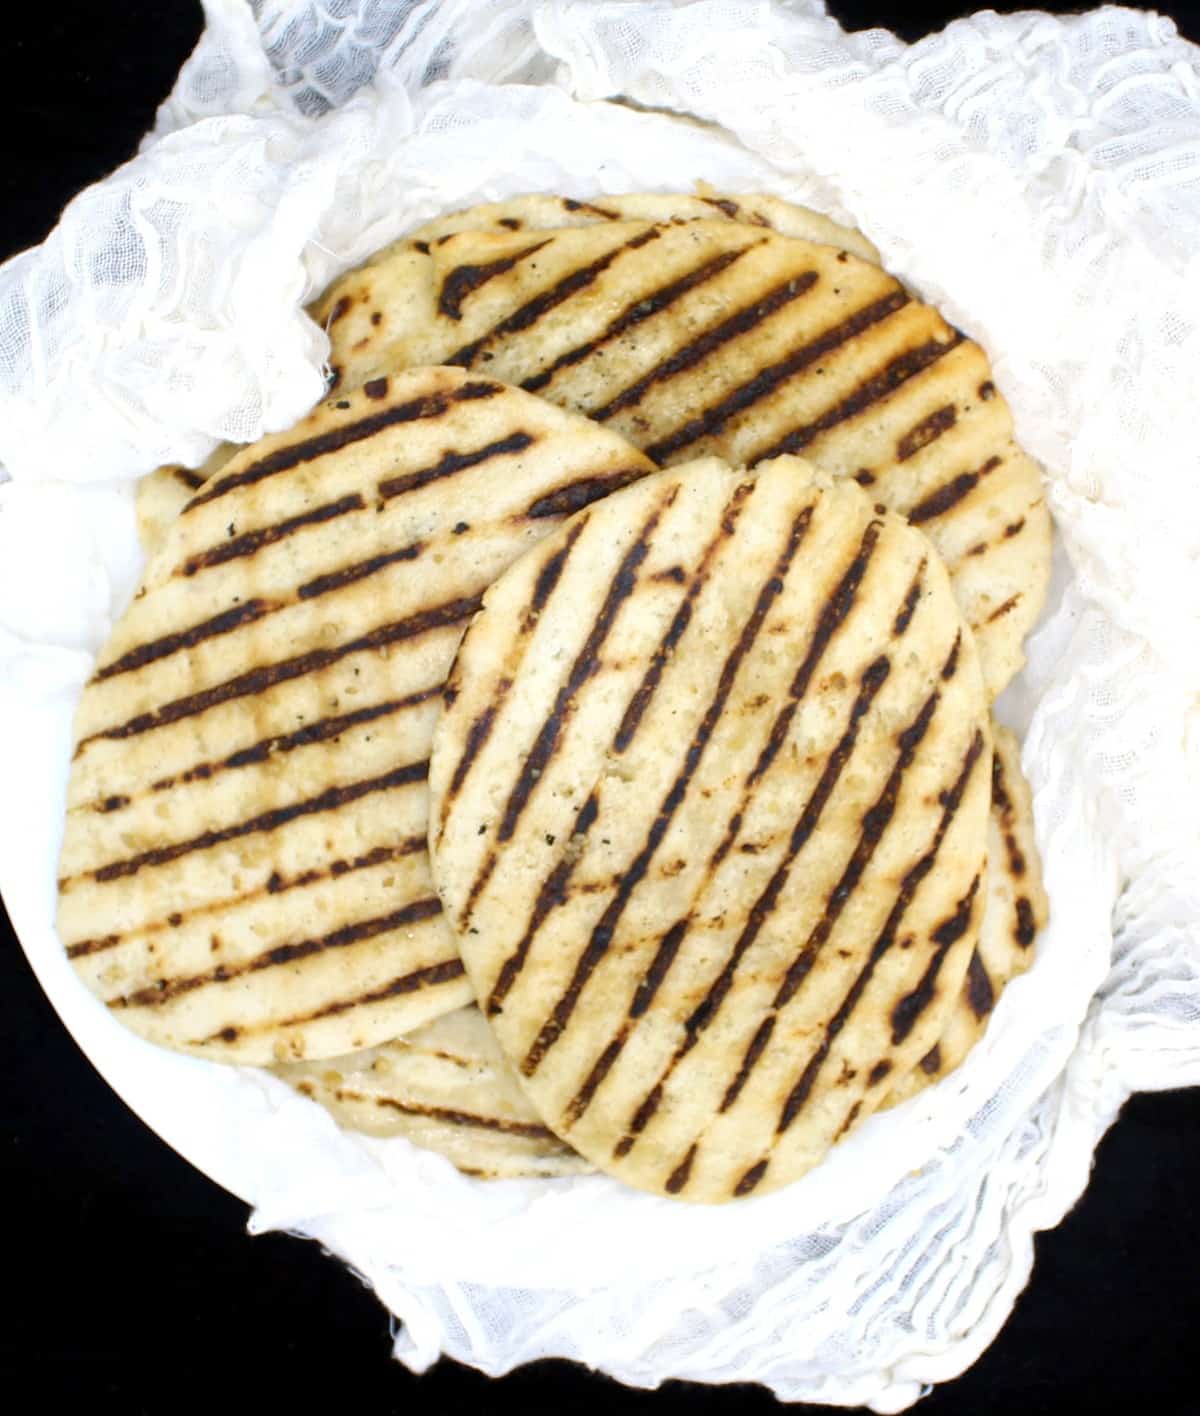 A stack of grilled vegan gluten free naans on a white plate wrapped in cheesecloth on a black background.